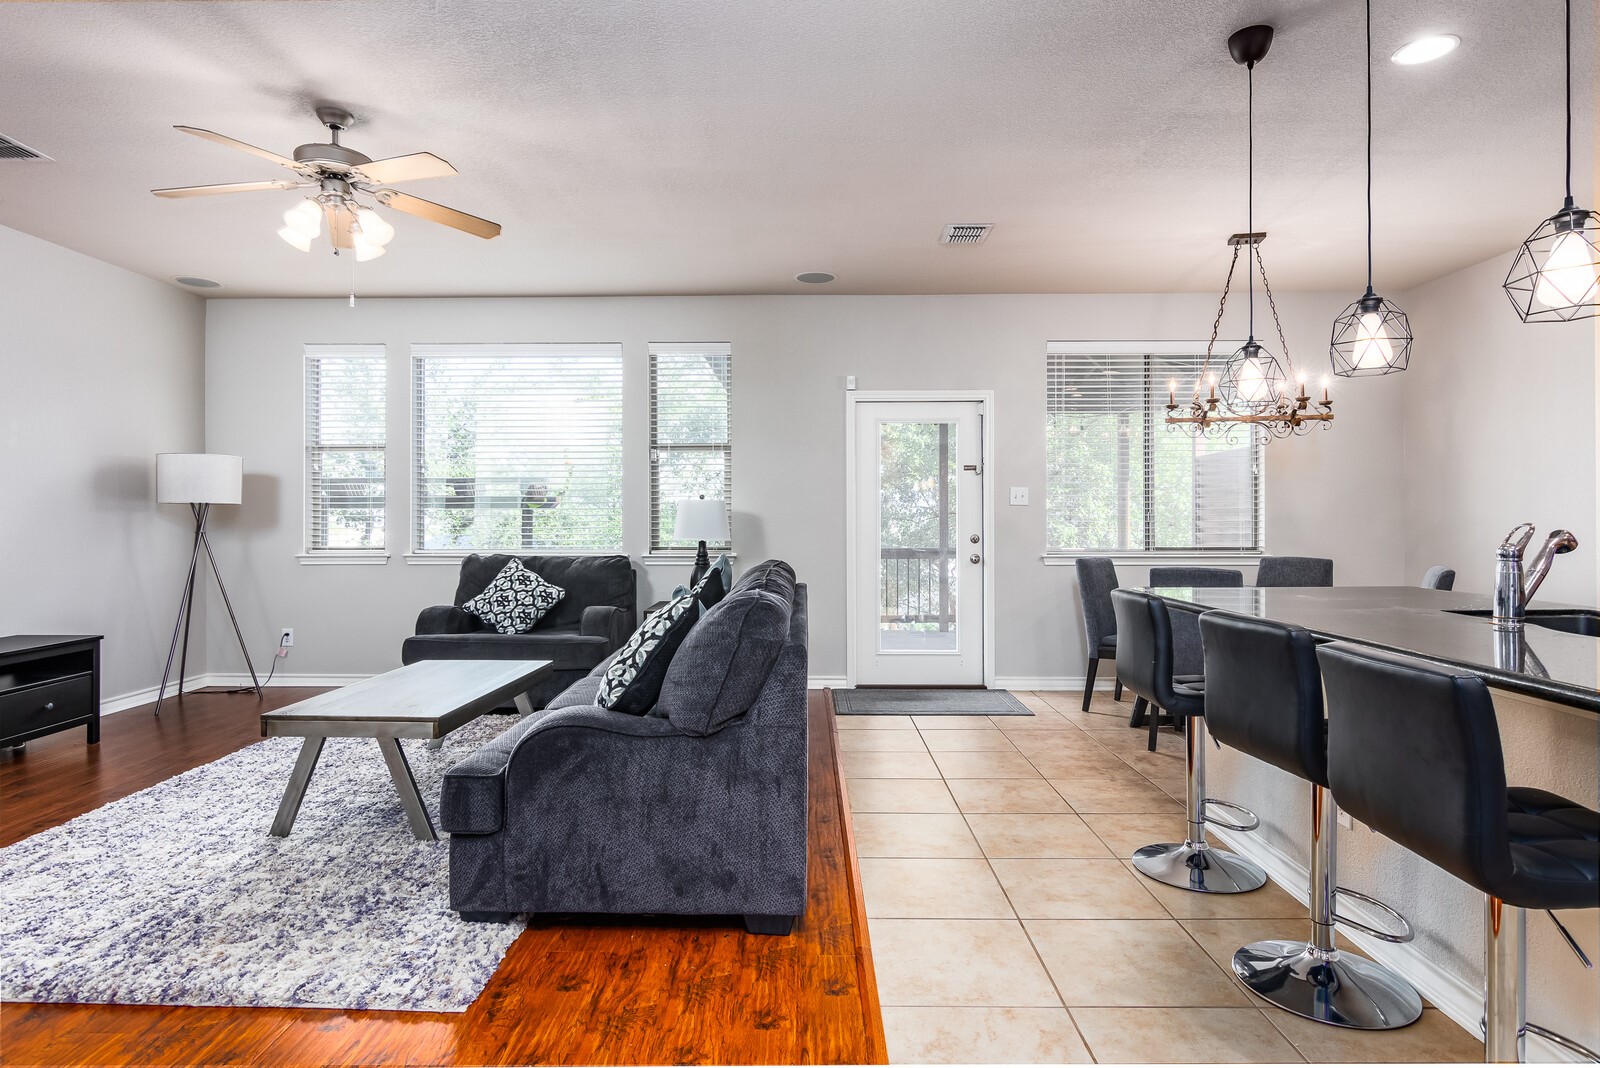 Multi-functional room for living area, breakfast area plus kitchen countertop bar. - If you have additional questions regarding 23510 Woodlawn Ridge  in San Antonio or would like to tour the property with us call 800-660-1022 and reference MLS# 19662027.